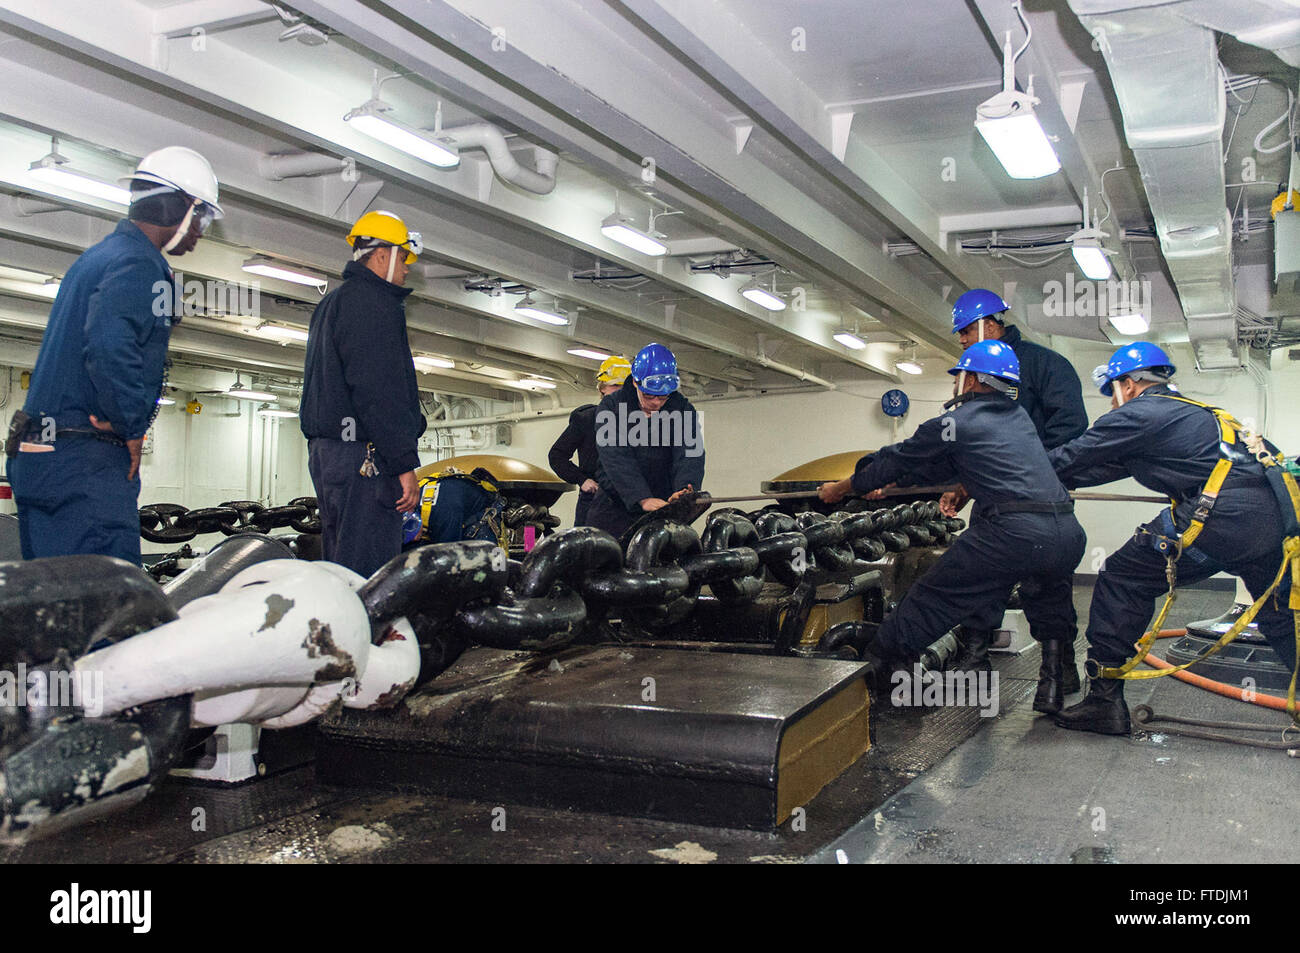 151209-N-NX690-032 SPLIT, CROATIA (Dec. 9, 2015) Sailors from Deck department attach a pelican hook to an anchor chain in the fo'c'sle aboard aircraft carrier USS Harry S. Truman (CVN 75). Harry S. Truman Carrier Strike Group is conducting naval operations in the U.S. 6th Fleet area of operations in support of U.S. national security interests in Europe and Africa. (U.S. Navy photo by Mass Communication Specialist 3rd Class J. M. Tolbert/Released) Stock Photo